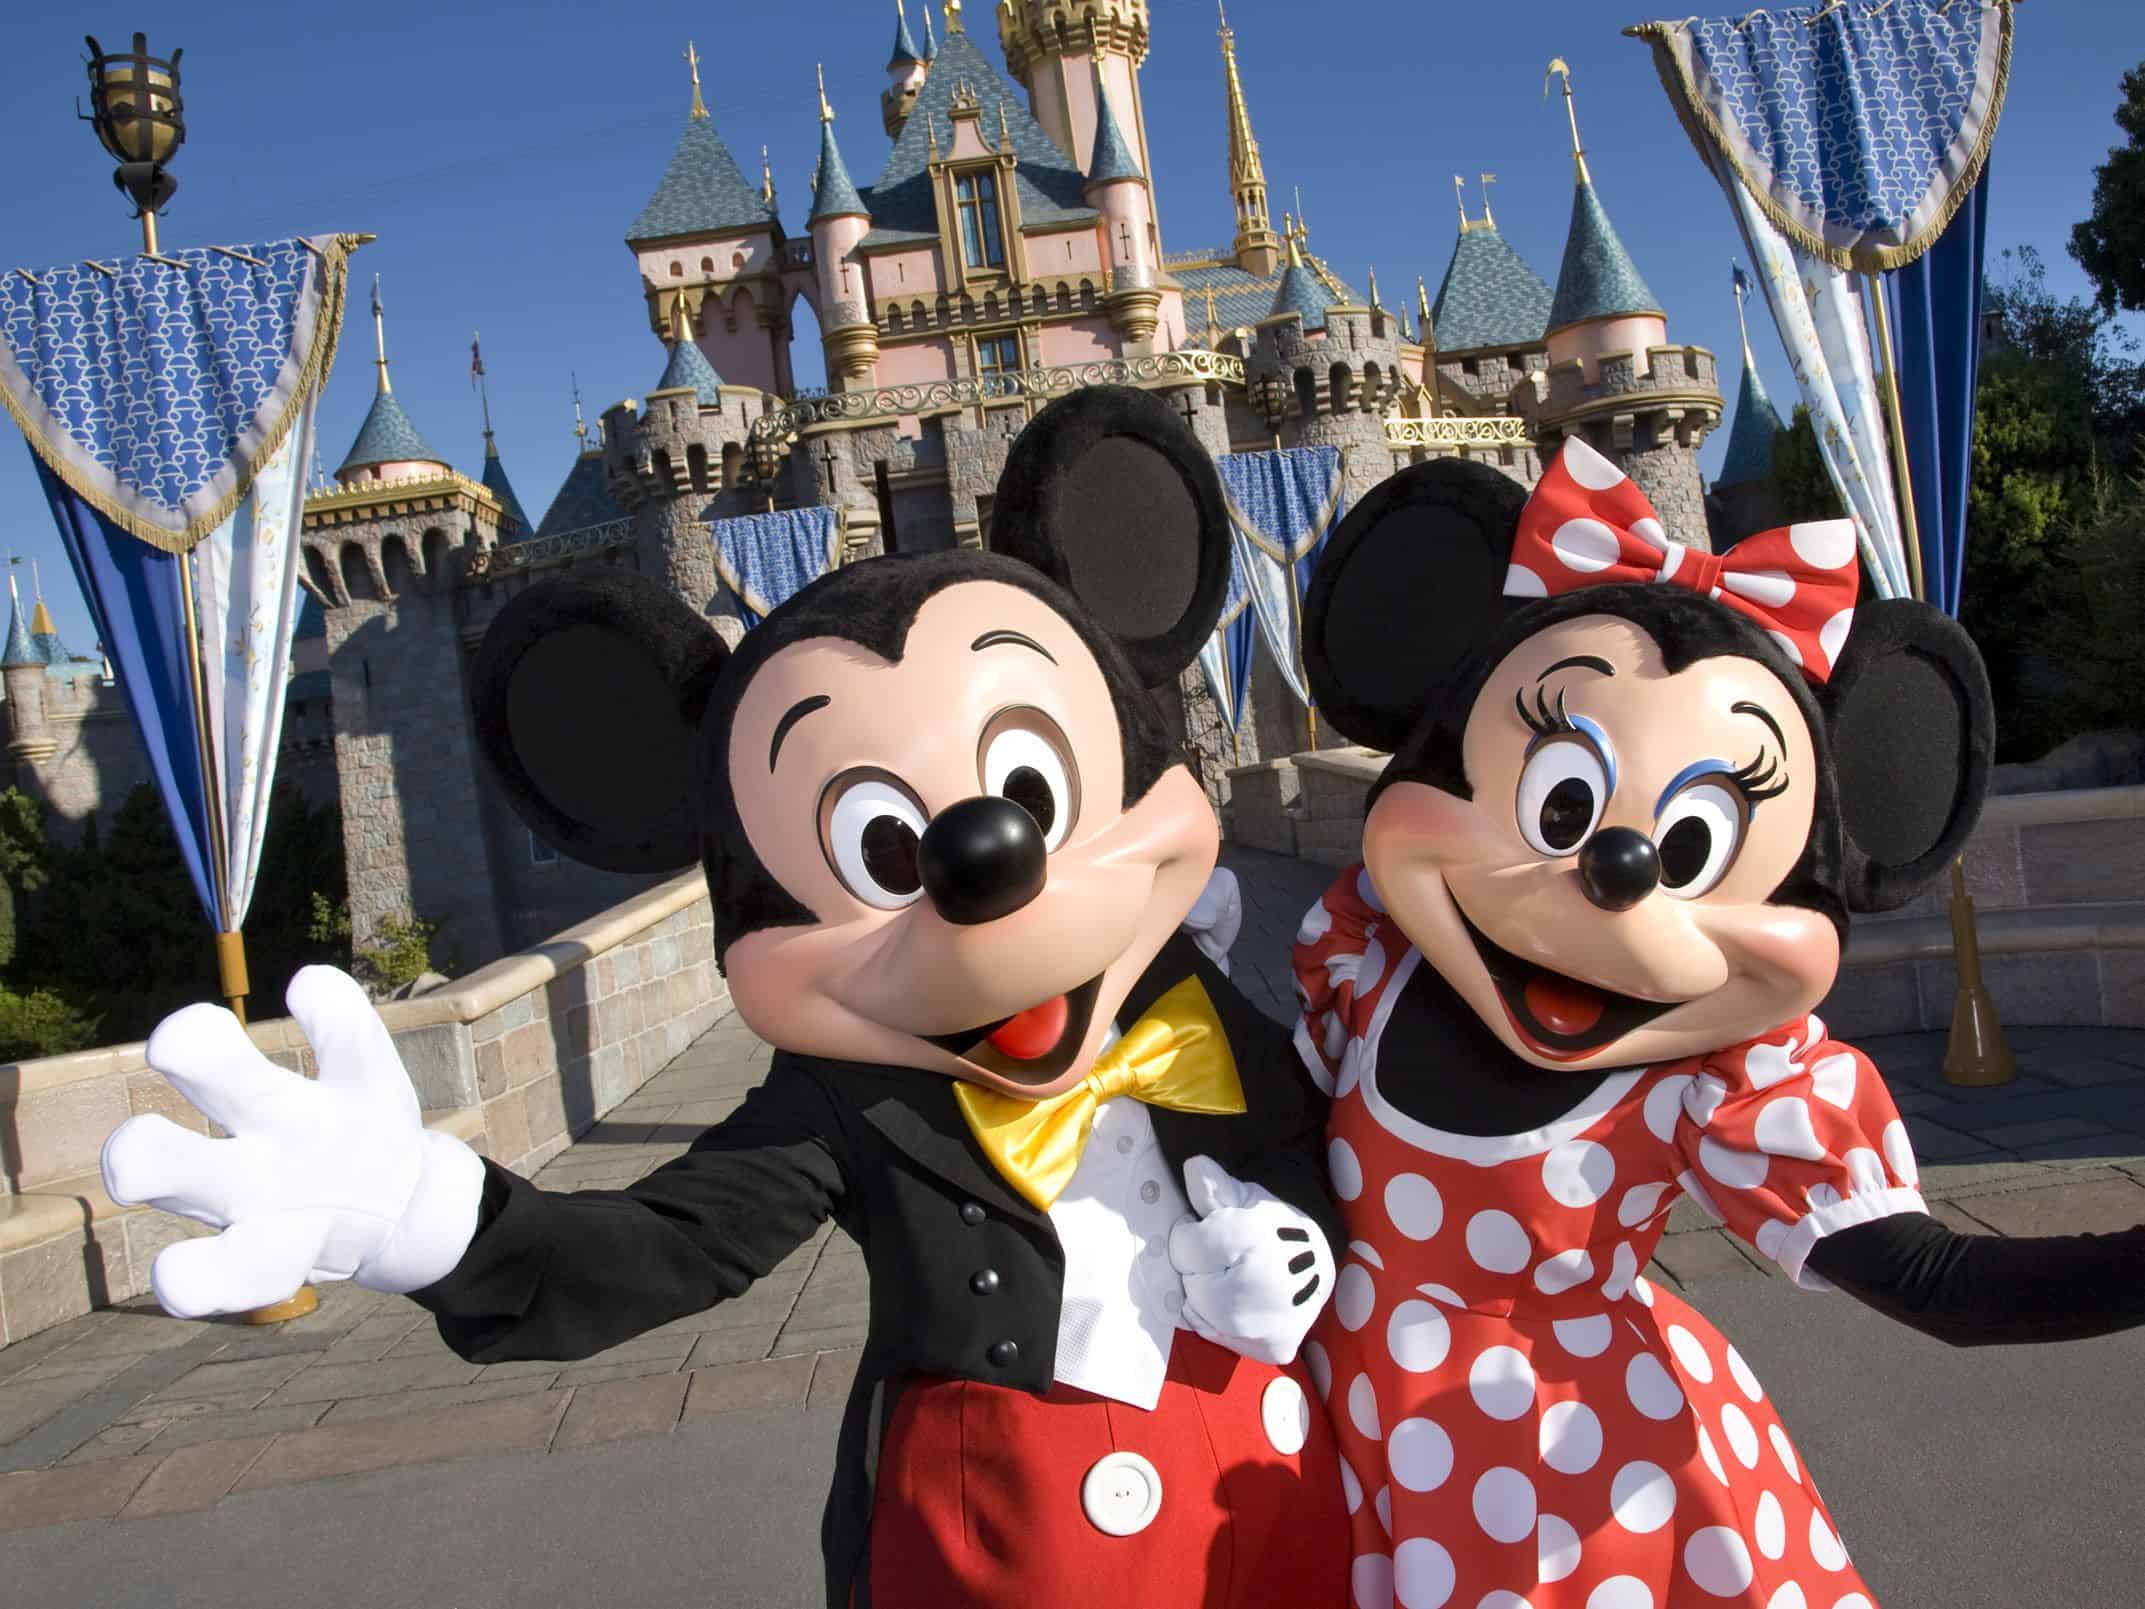 Disneyland Is Welcoming Younger Adults Back As Covid-19 Cases Rise